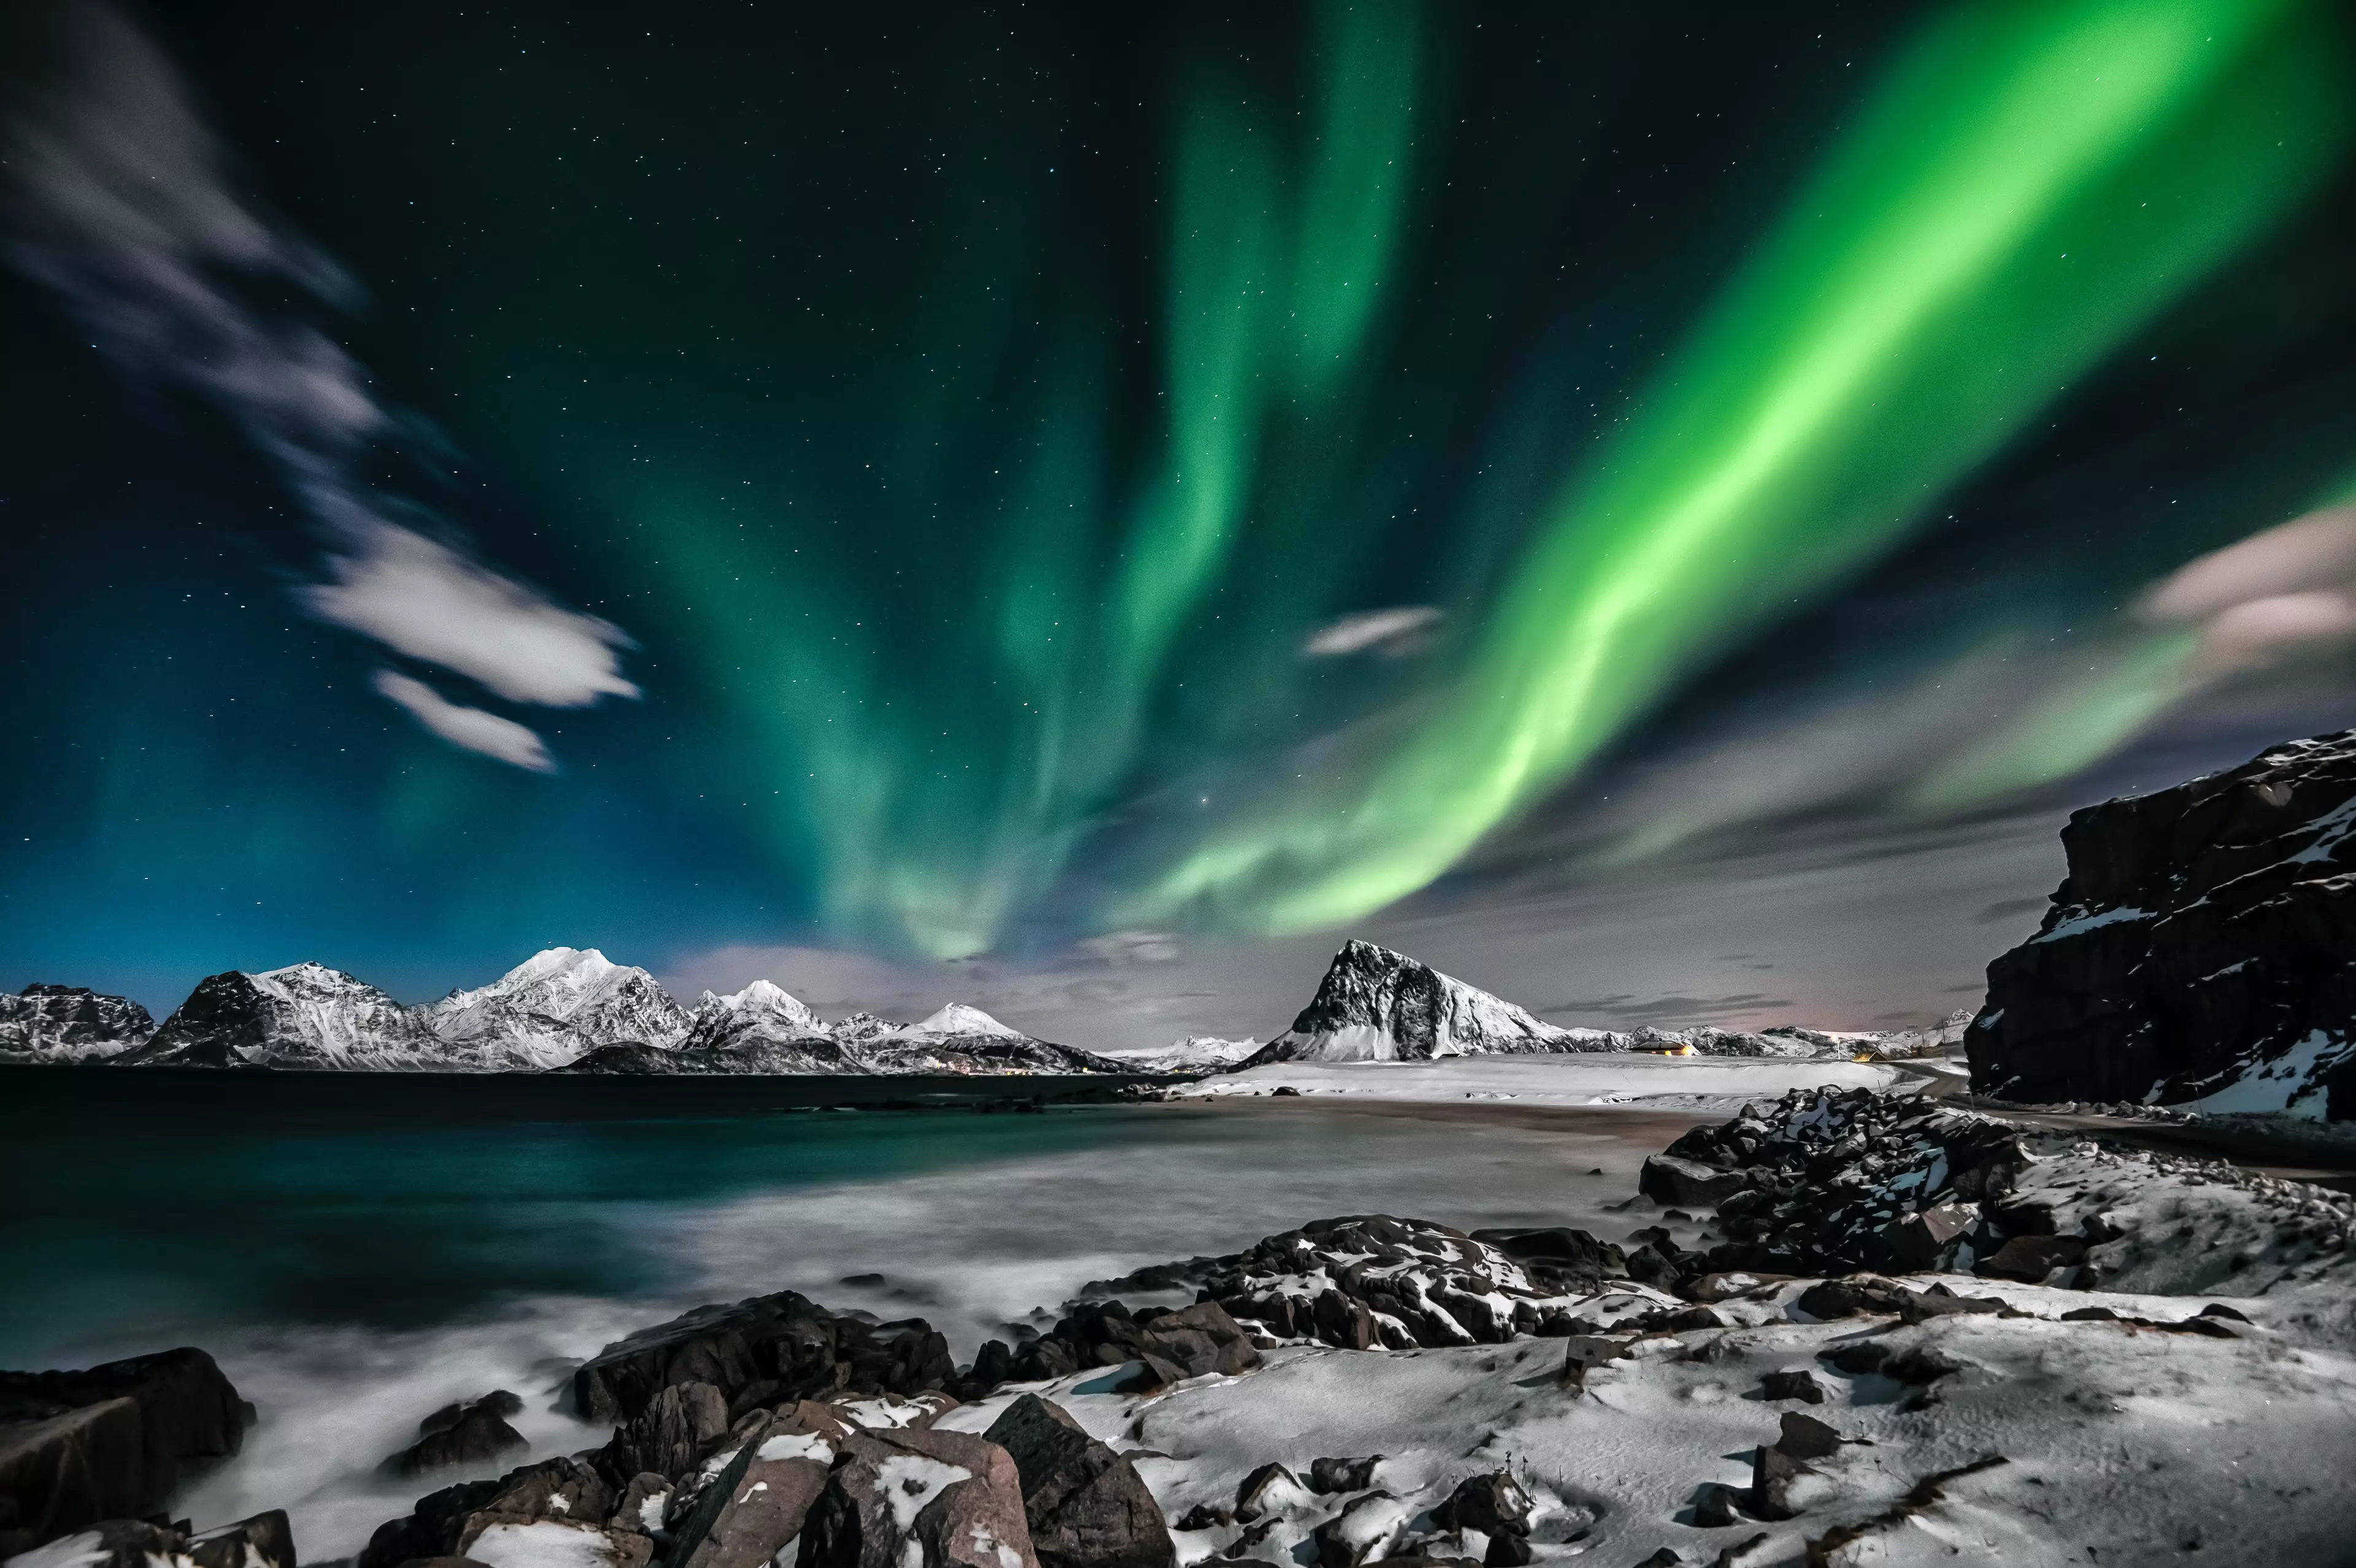 If cloud coverage in the sky is low, you might be able to catch a glimpse of the Northern Lights (